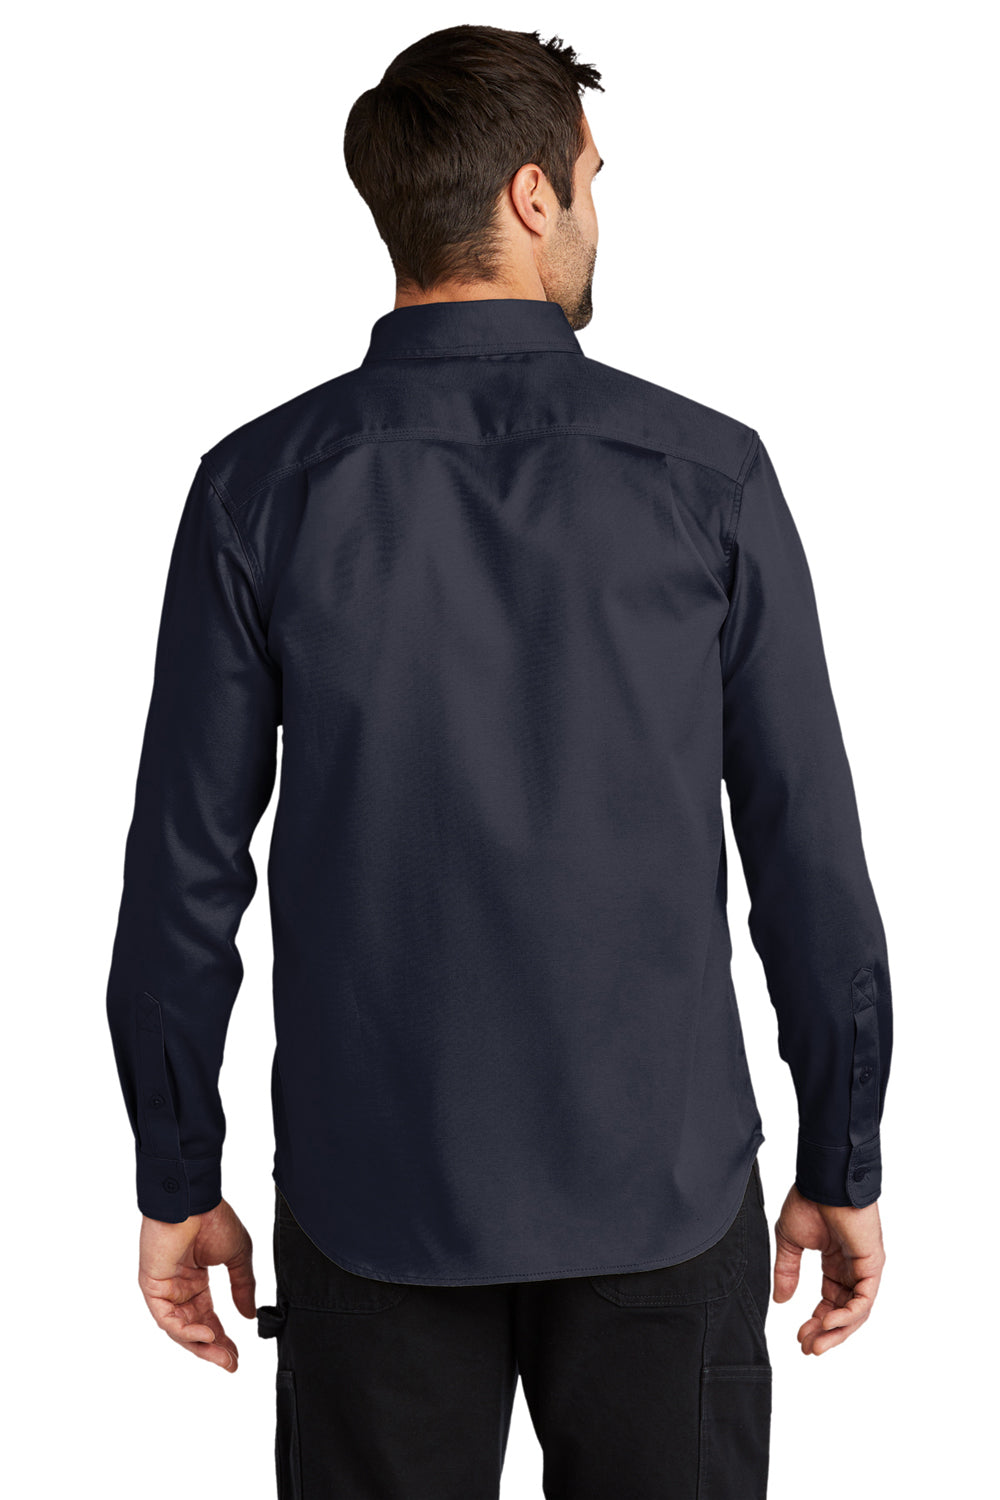 Carhartt CT102538 Mens Rugged Professional Series Wrinkle Resistant Long Sleeve Button Down Shirt w/ Pocket Navy Blue Model Back